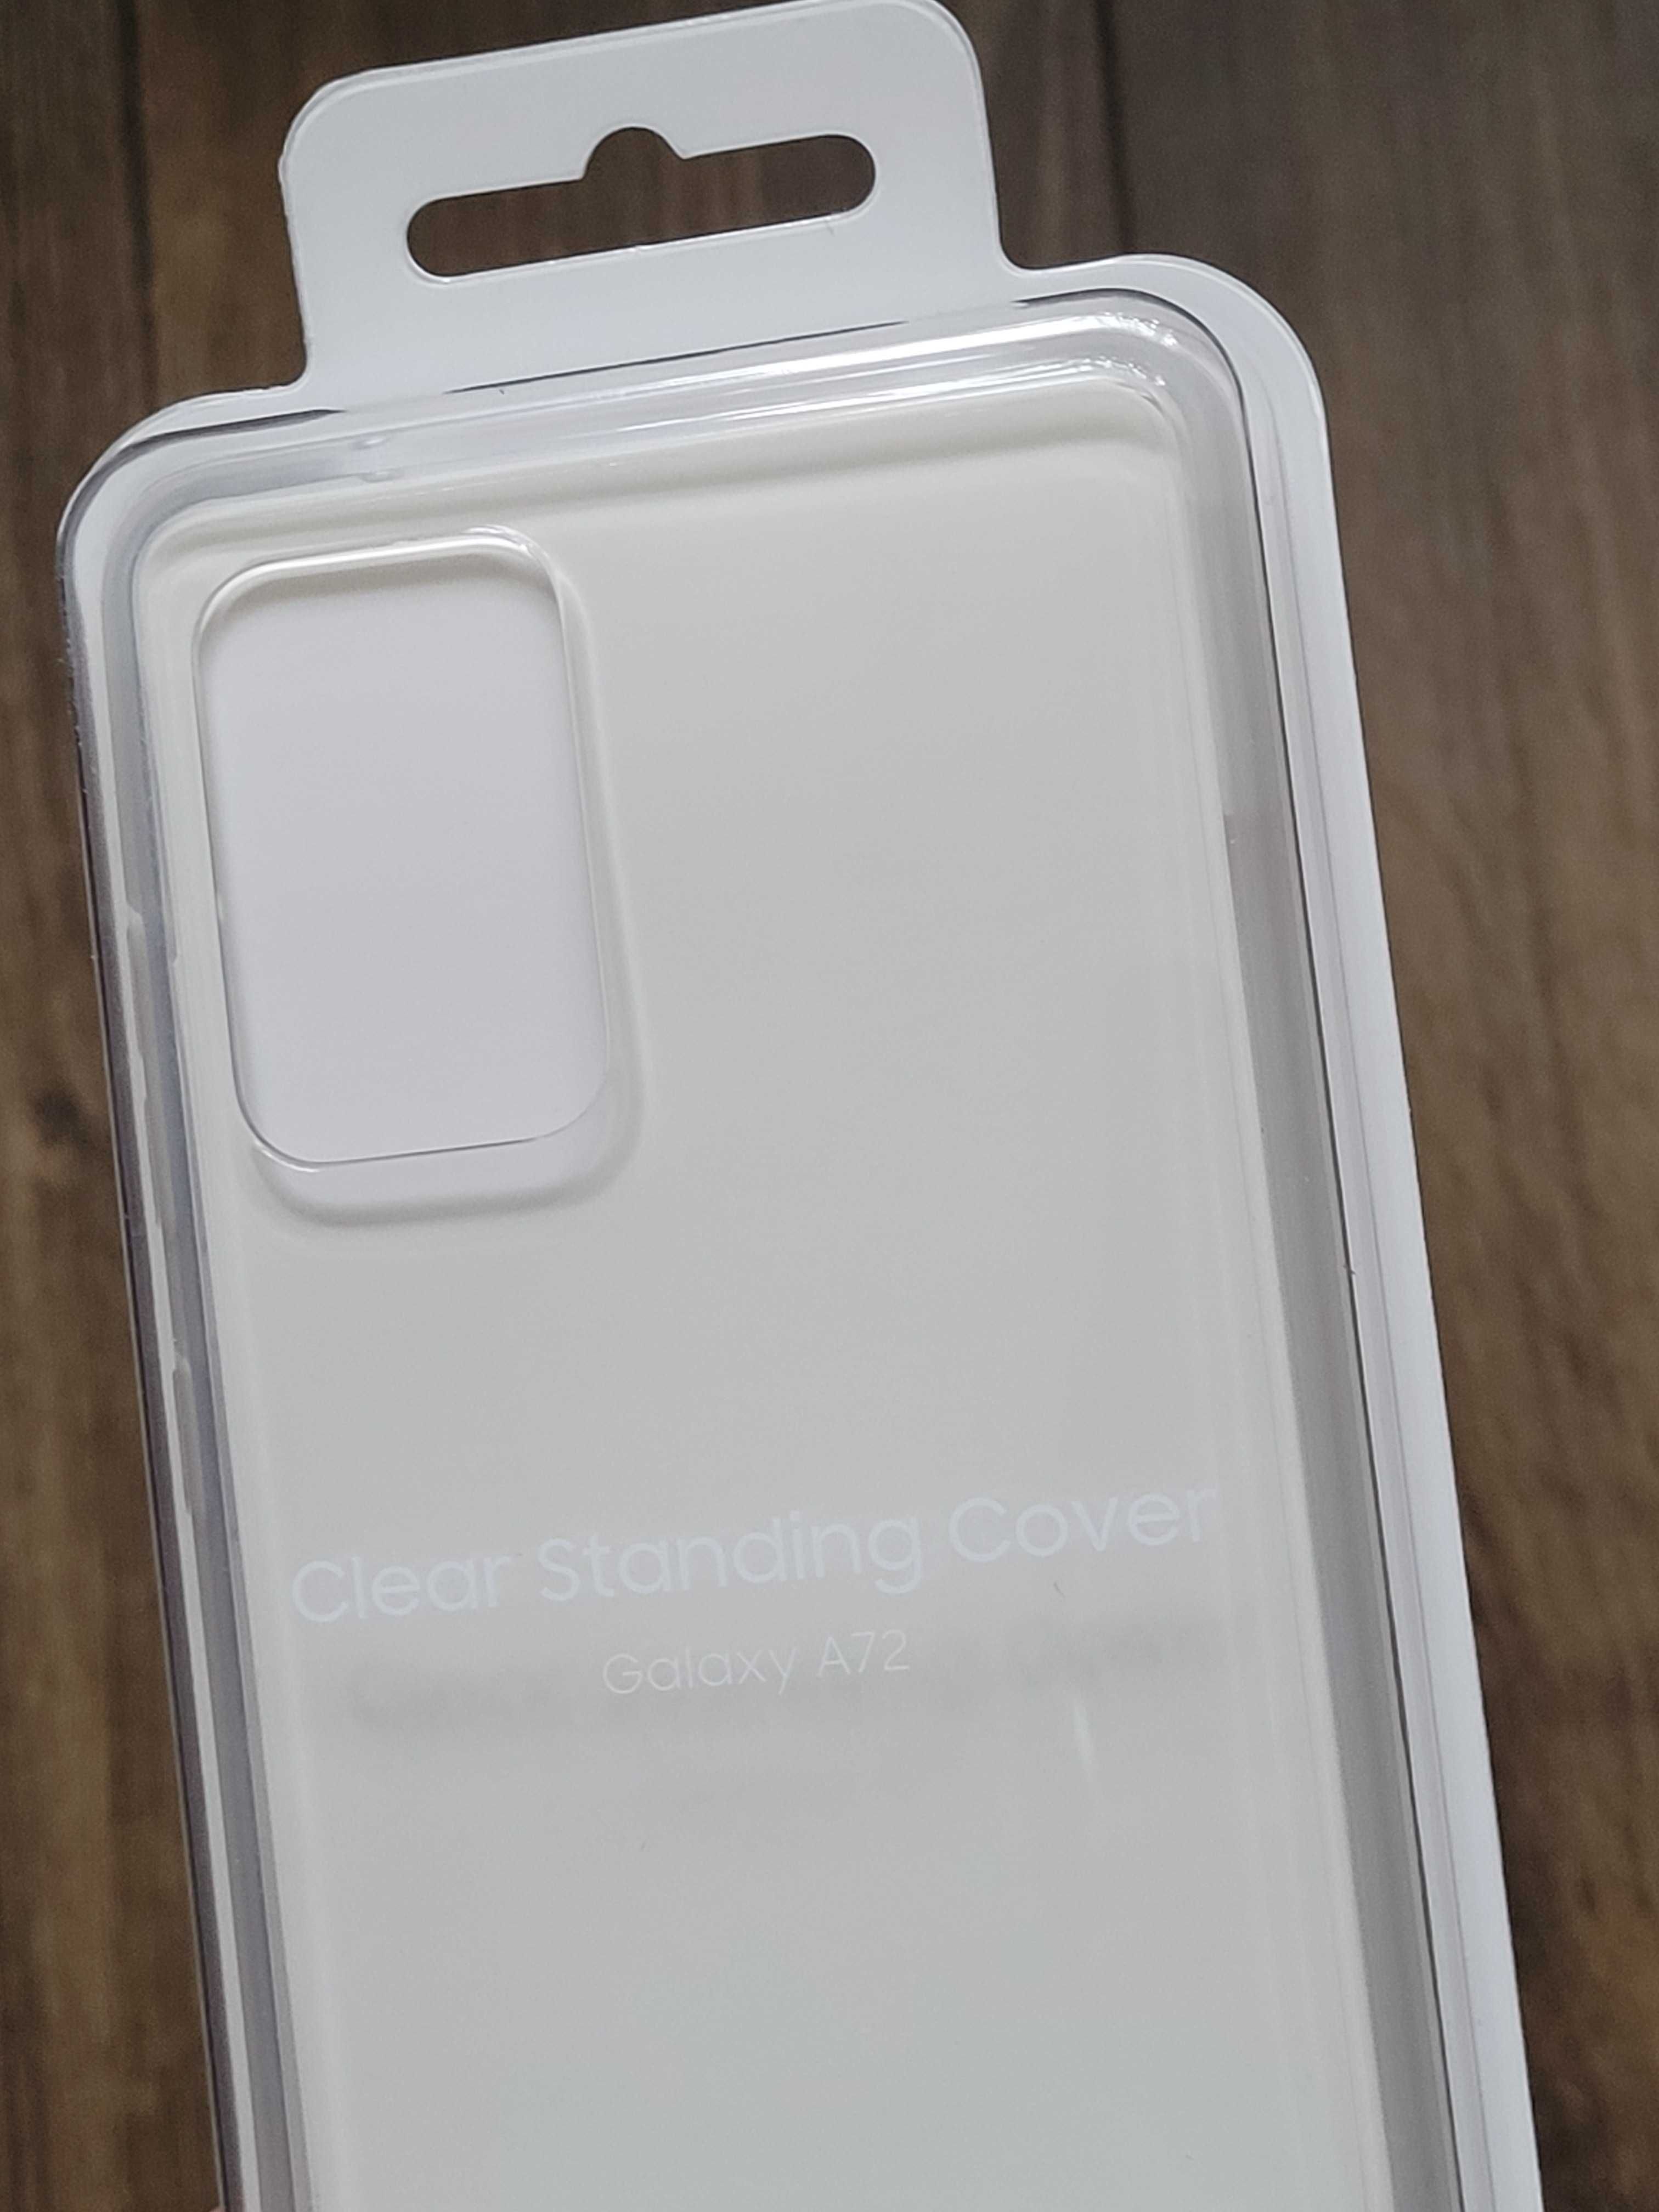 Etui Samsung Clear Standing Cover do Galaxy A72 nowe oryginalne